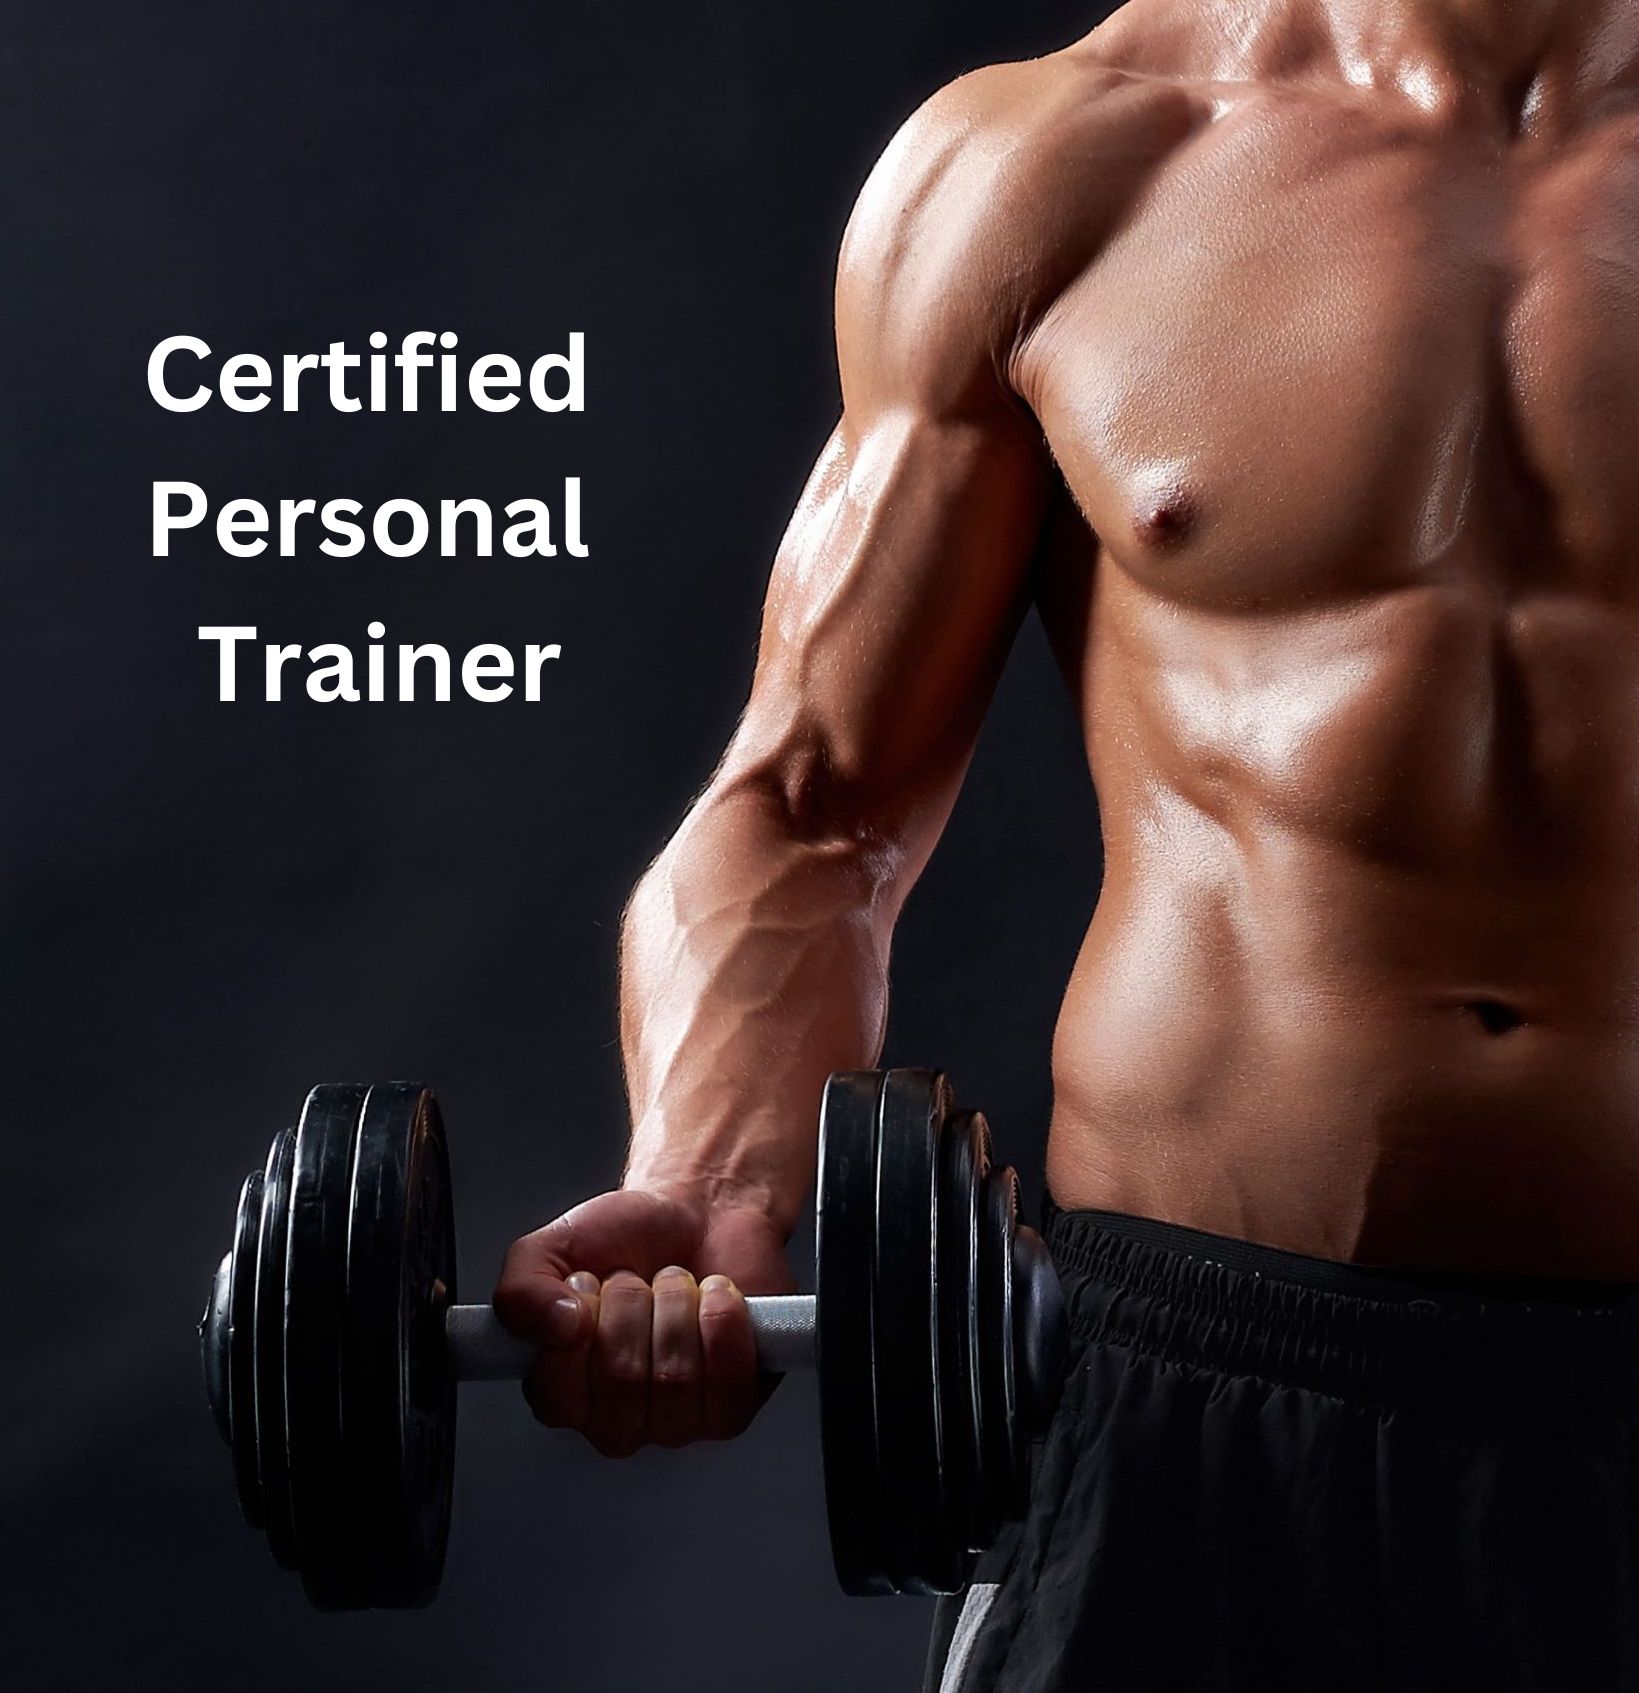 Top 3 Things Only Certified Personal Training Can Provide You!